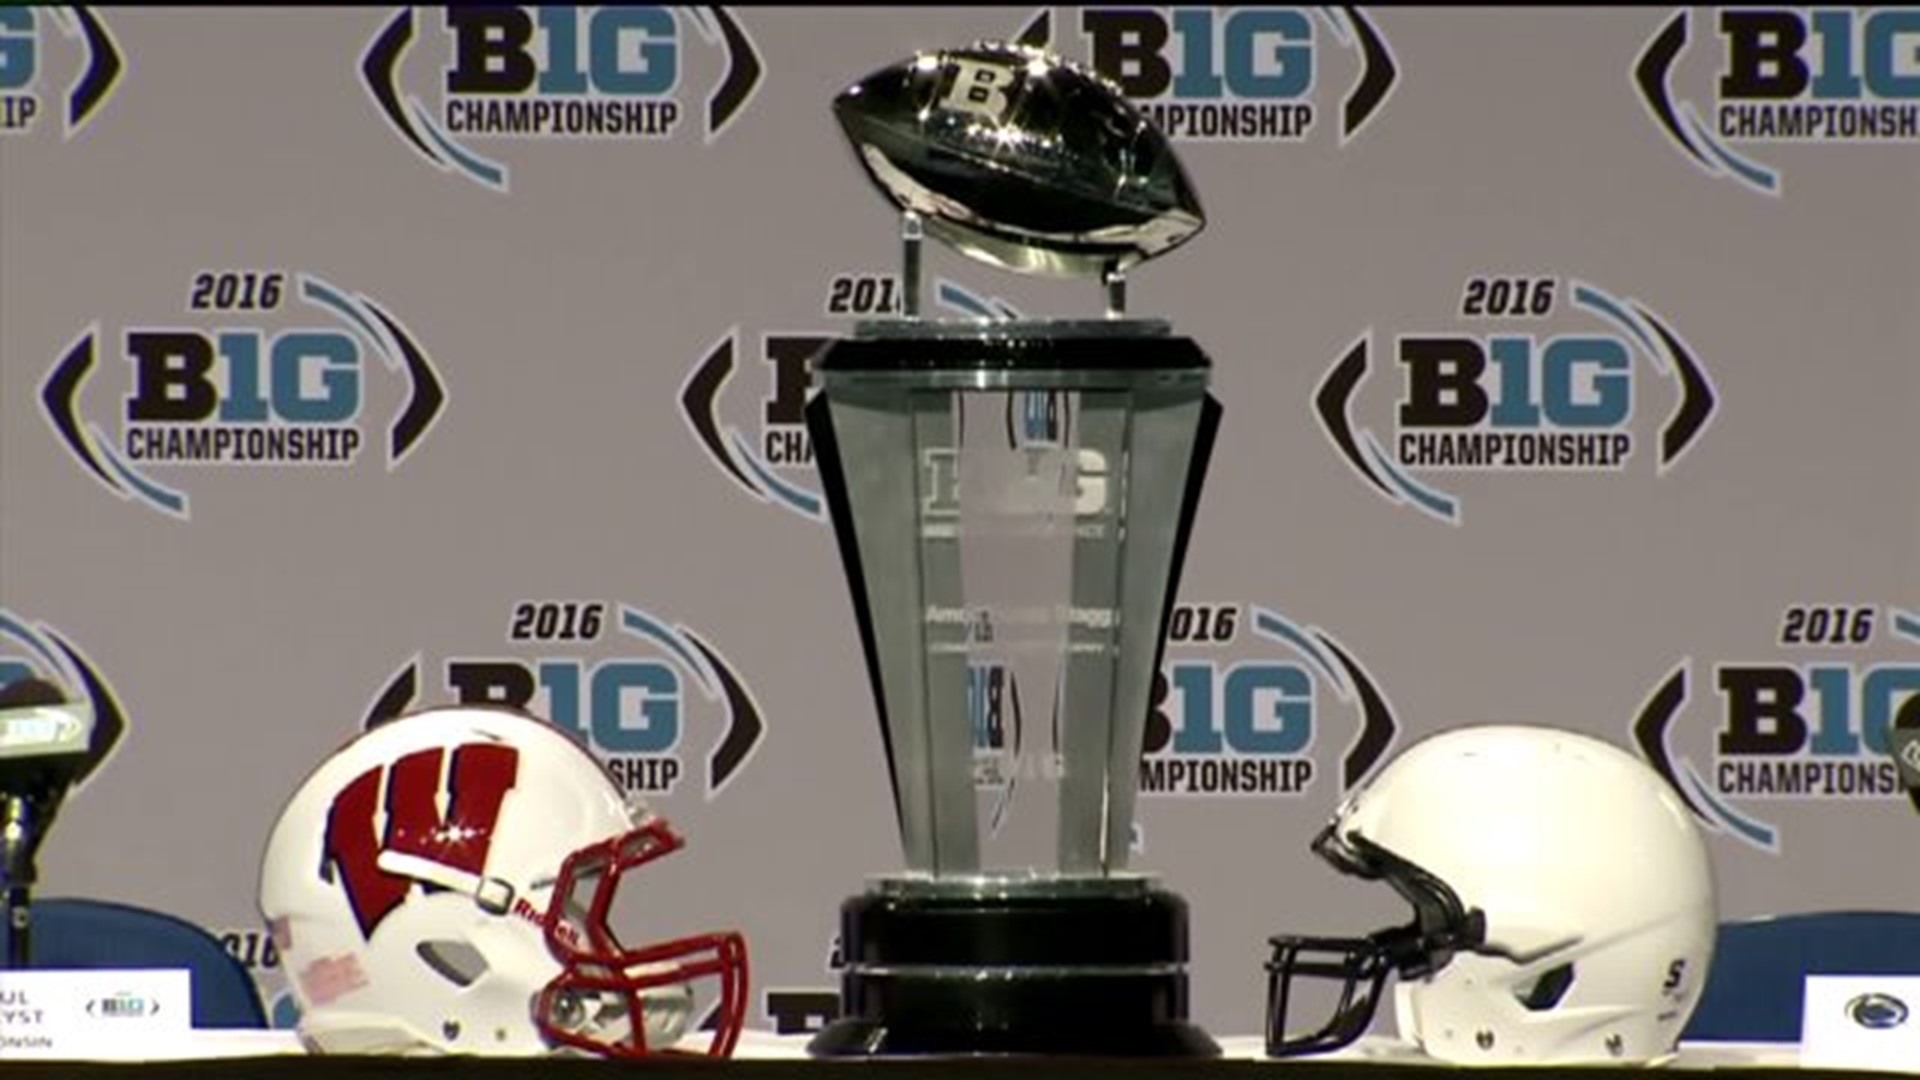 Penn State Playing for B1G Title